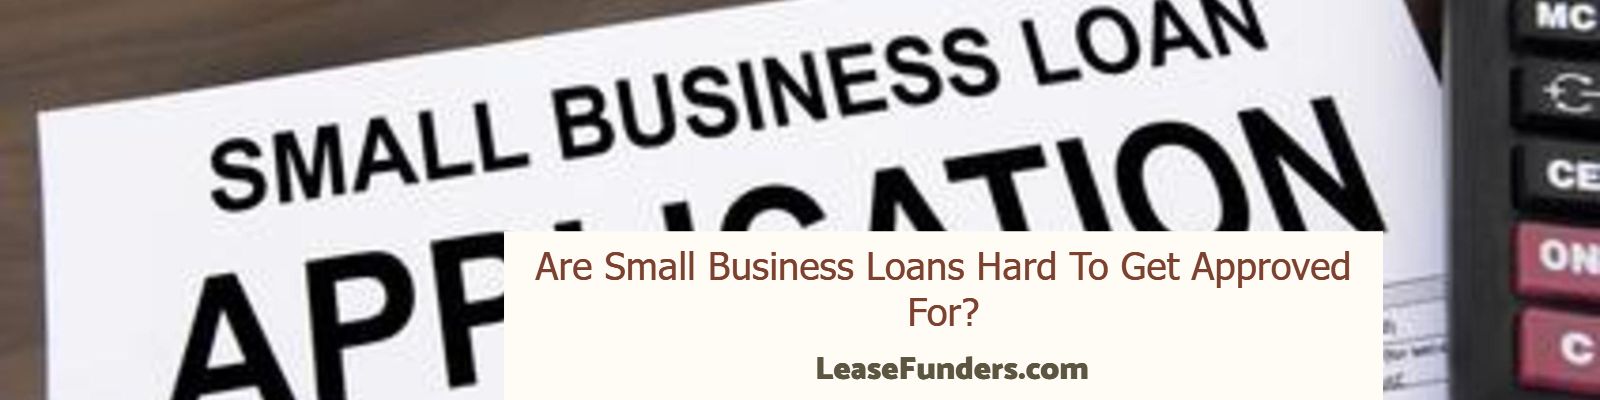 Are small business loans hard to get